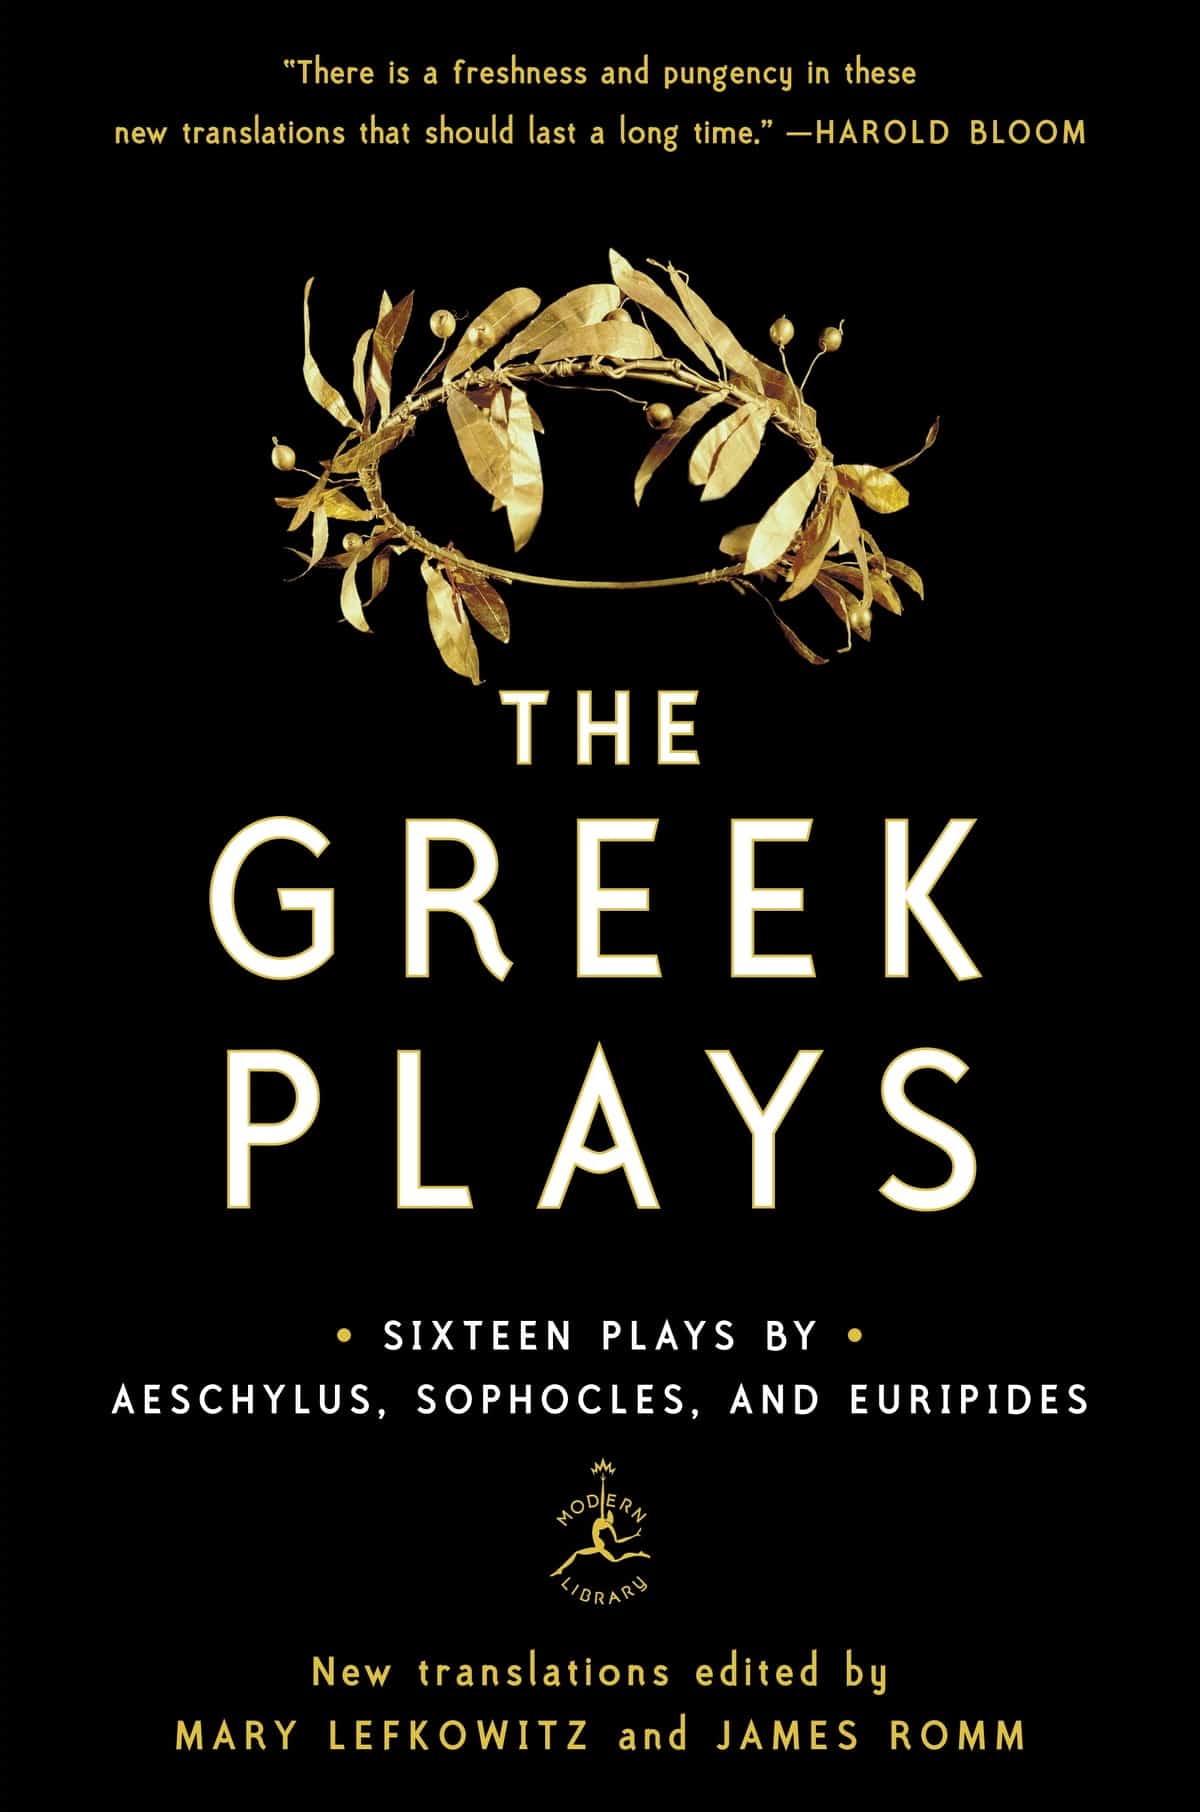 The Greek Plays – Sixteen Plays by Aeschylus, Sophocles, And Euripides, edited by Mary Lefkowitz and James Romm